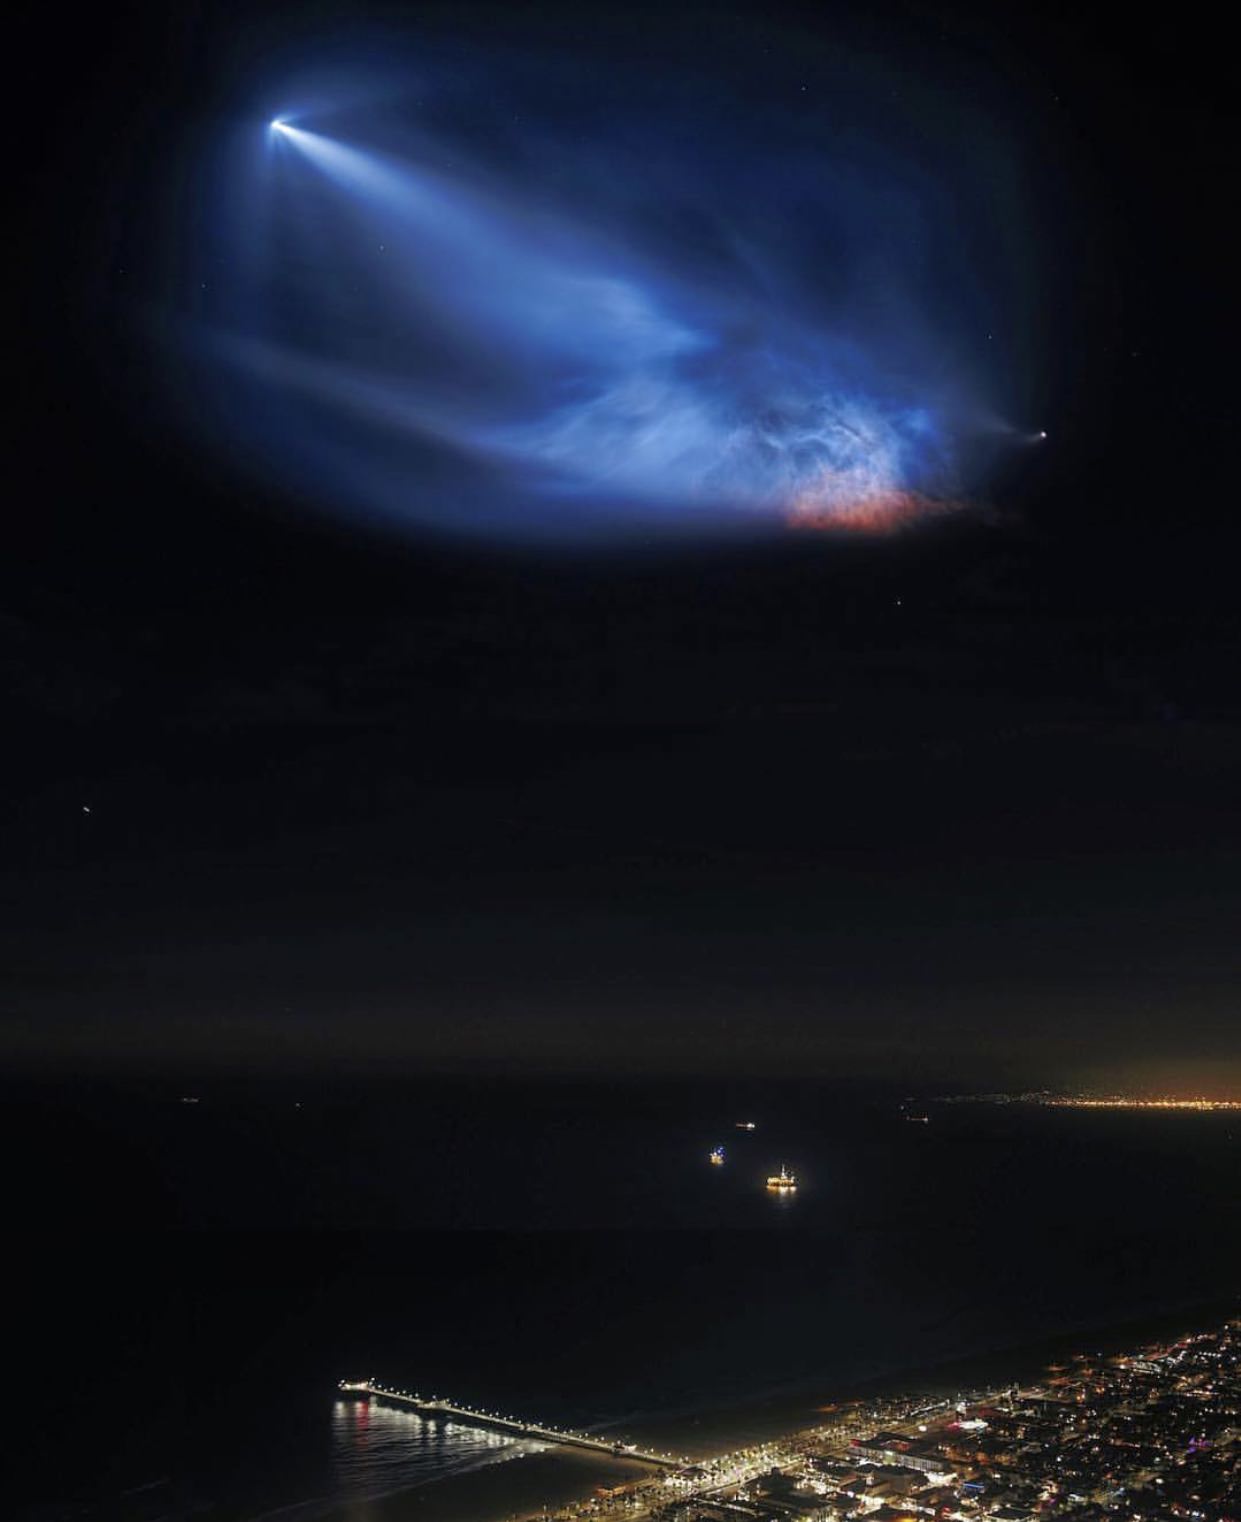 Micah Fitch captured this stunning image of the recently launched Space X rocket using an Inspire 2 drone equipped with a Zenmuse X5S camera and an Olympus 25mm f/1.8 lens. He quickly recorded three shots in 4:3 ratio and merged the image vertically so that 30% of the edge of each shot overlapped the other. In addition to the rocket itself, the photography of the Huntington Pier beach was also considered by the photographer to show the scale and extent of this event. Mika has combined three files in RAW format using Lightroom's panorama function in such a way that at first glance this integration is not noticeable at all. His main intention was to show exactly what he had seen with his own eyes with the help of these edits and manipulations.